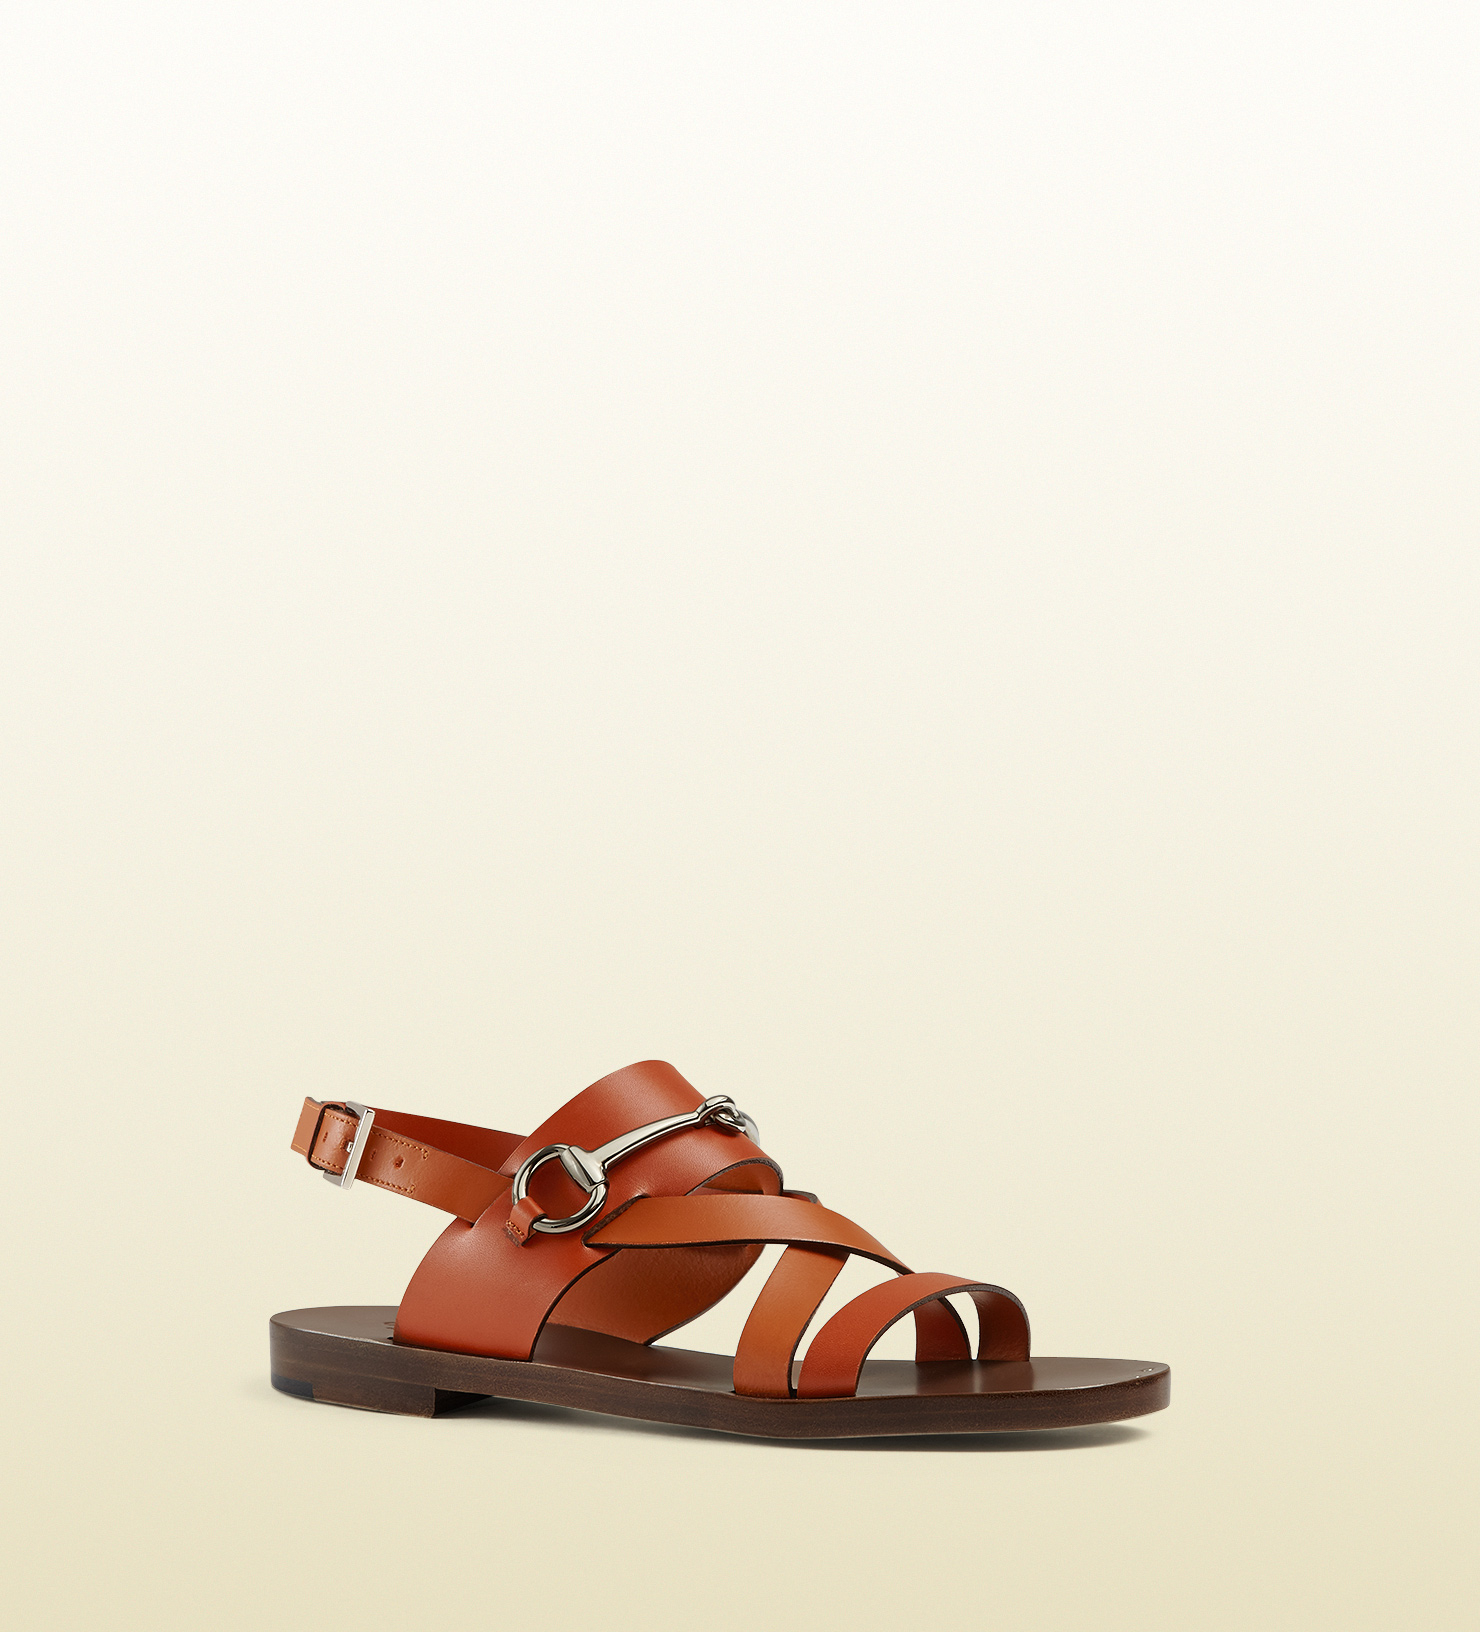  Gucci  Leather Horsebit Sandals  in Brown Lyst